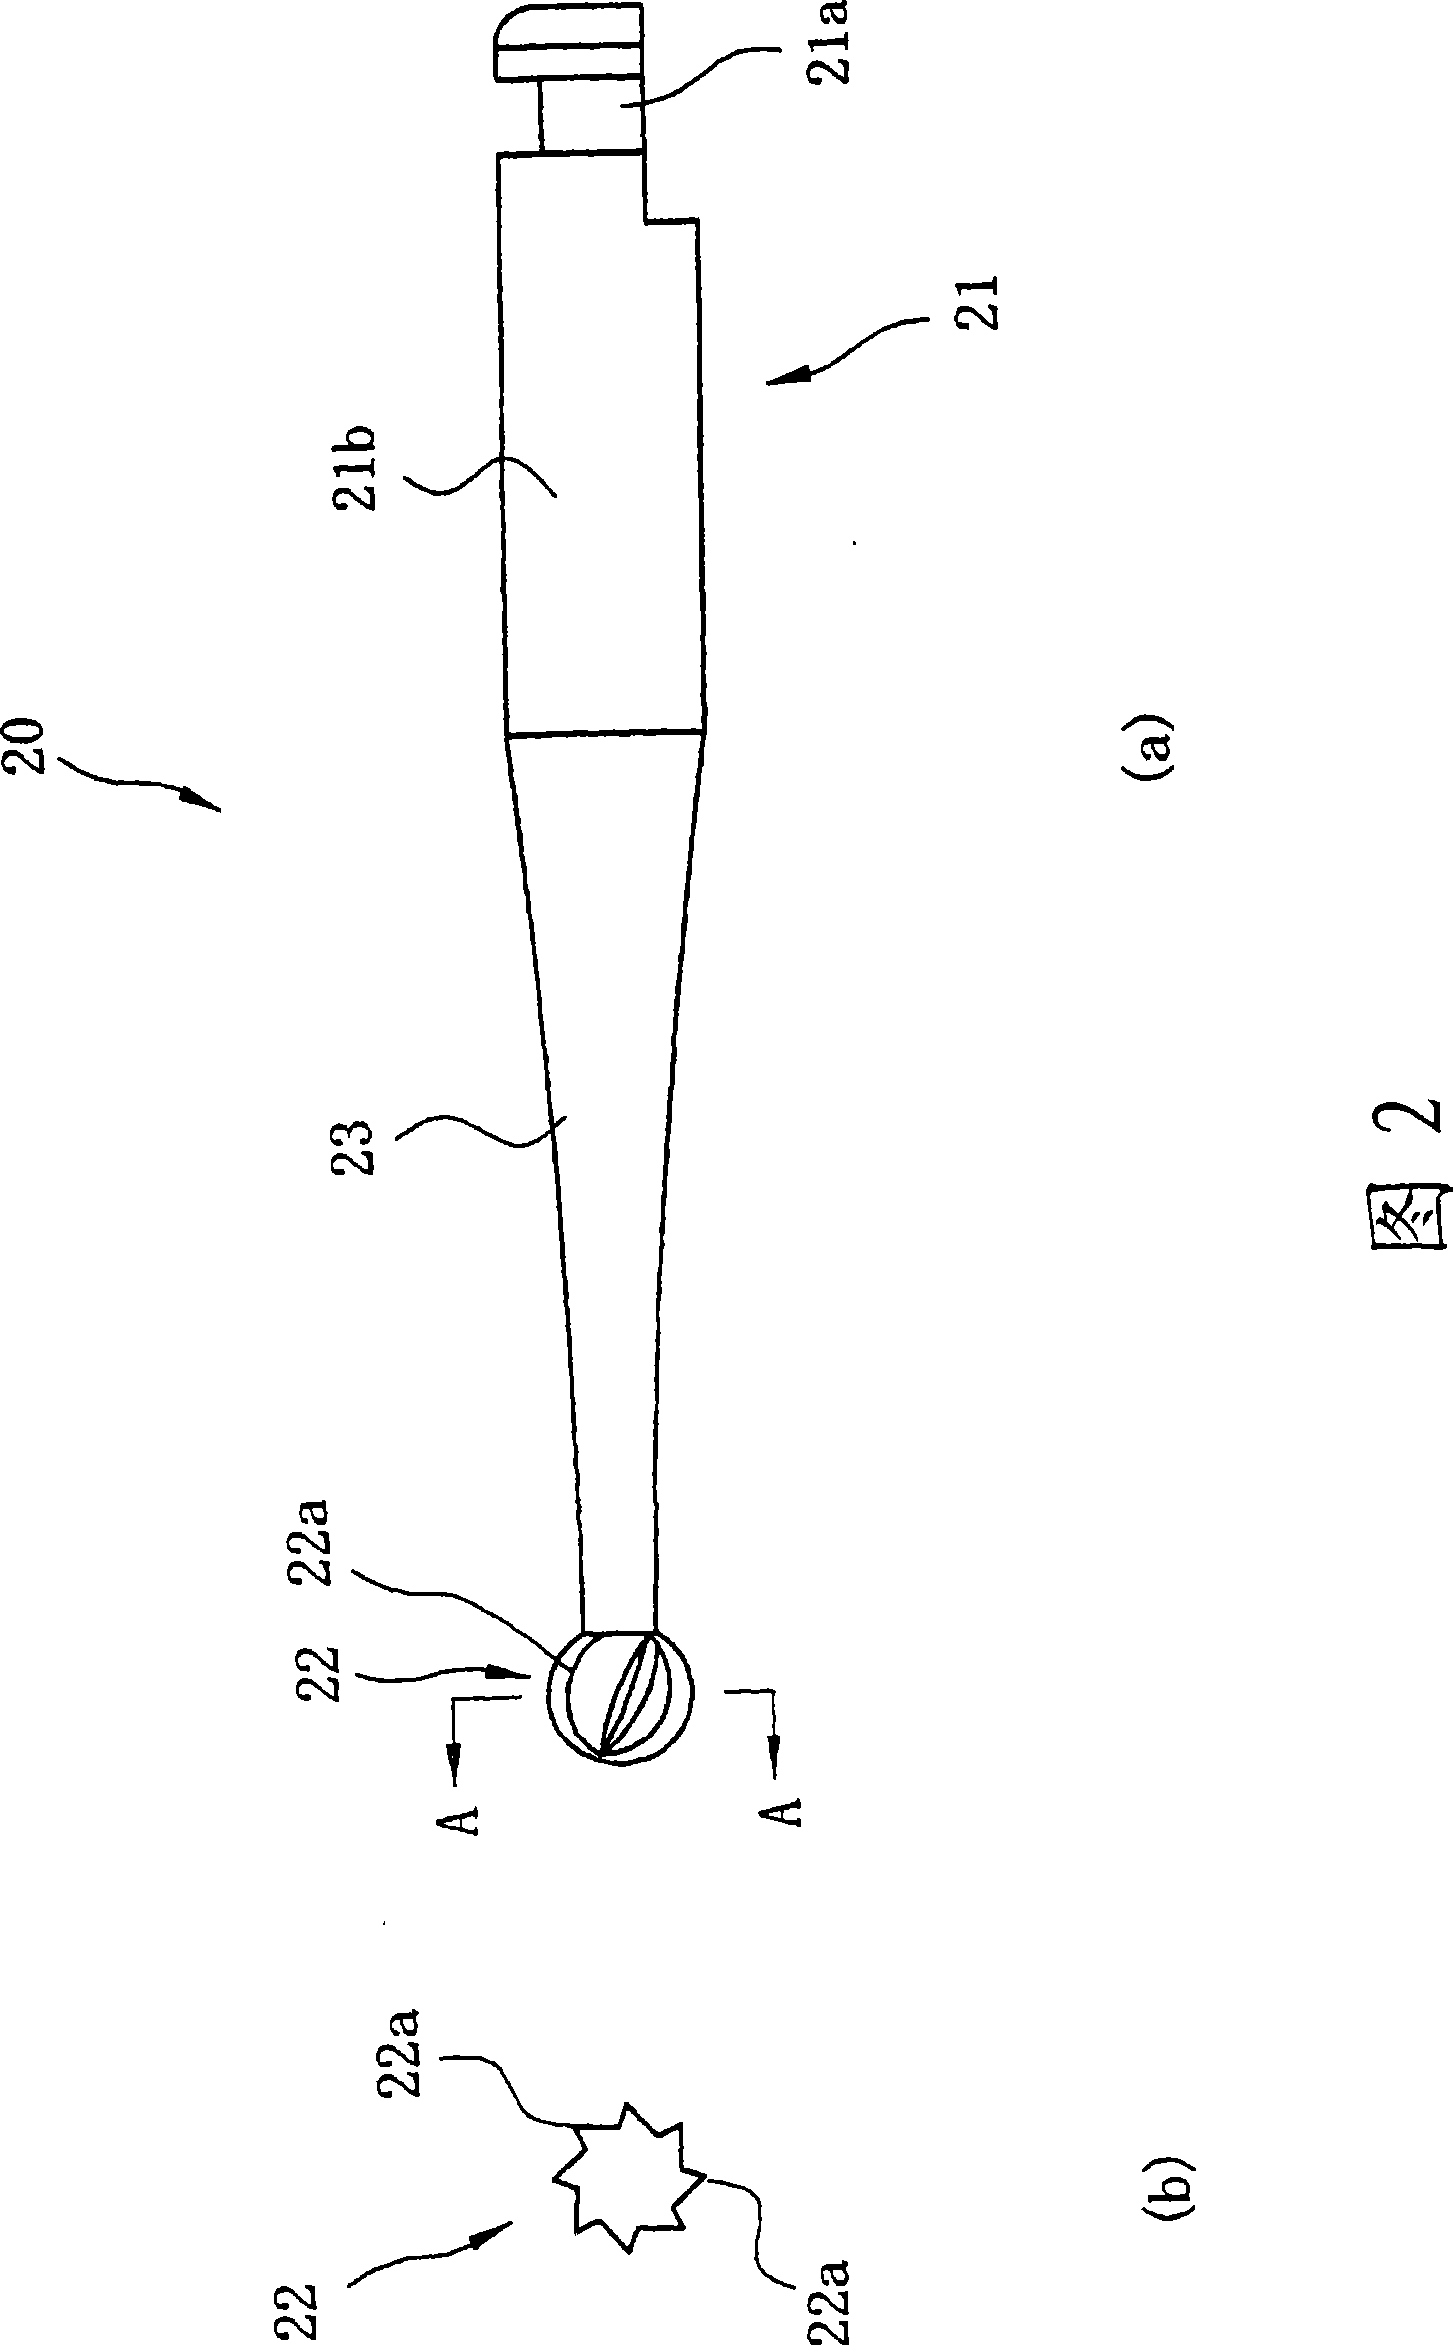 Medical cutting tool manufacturing apparatus and method